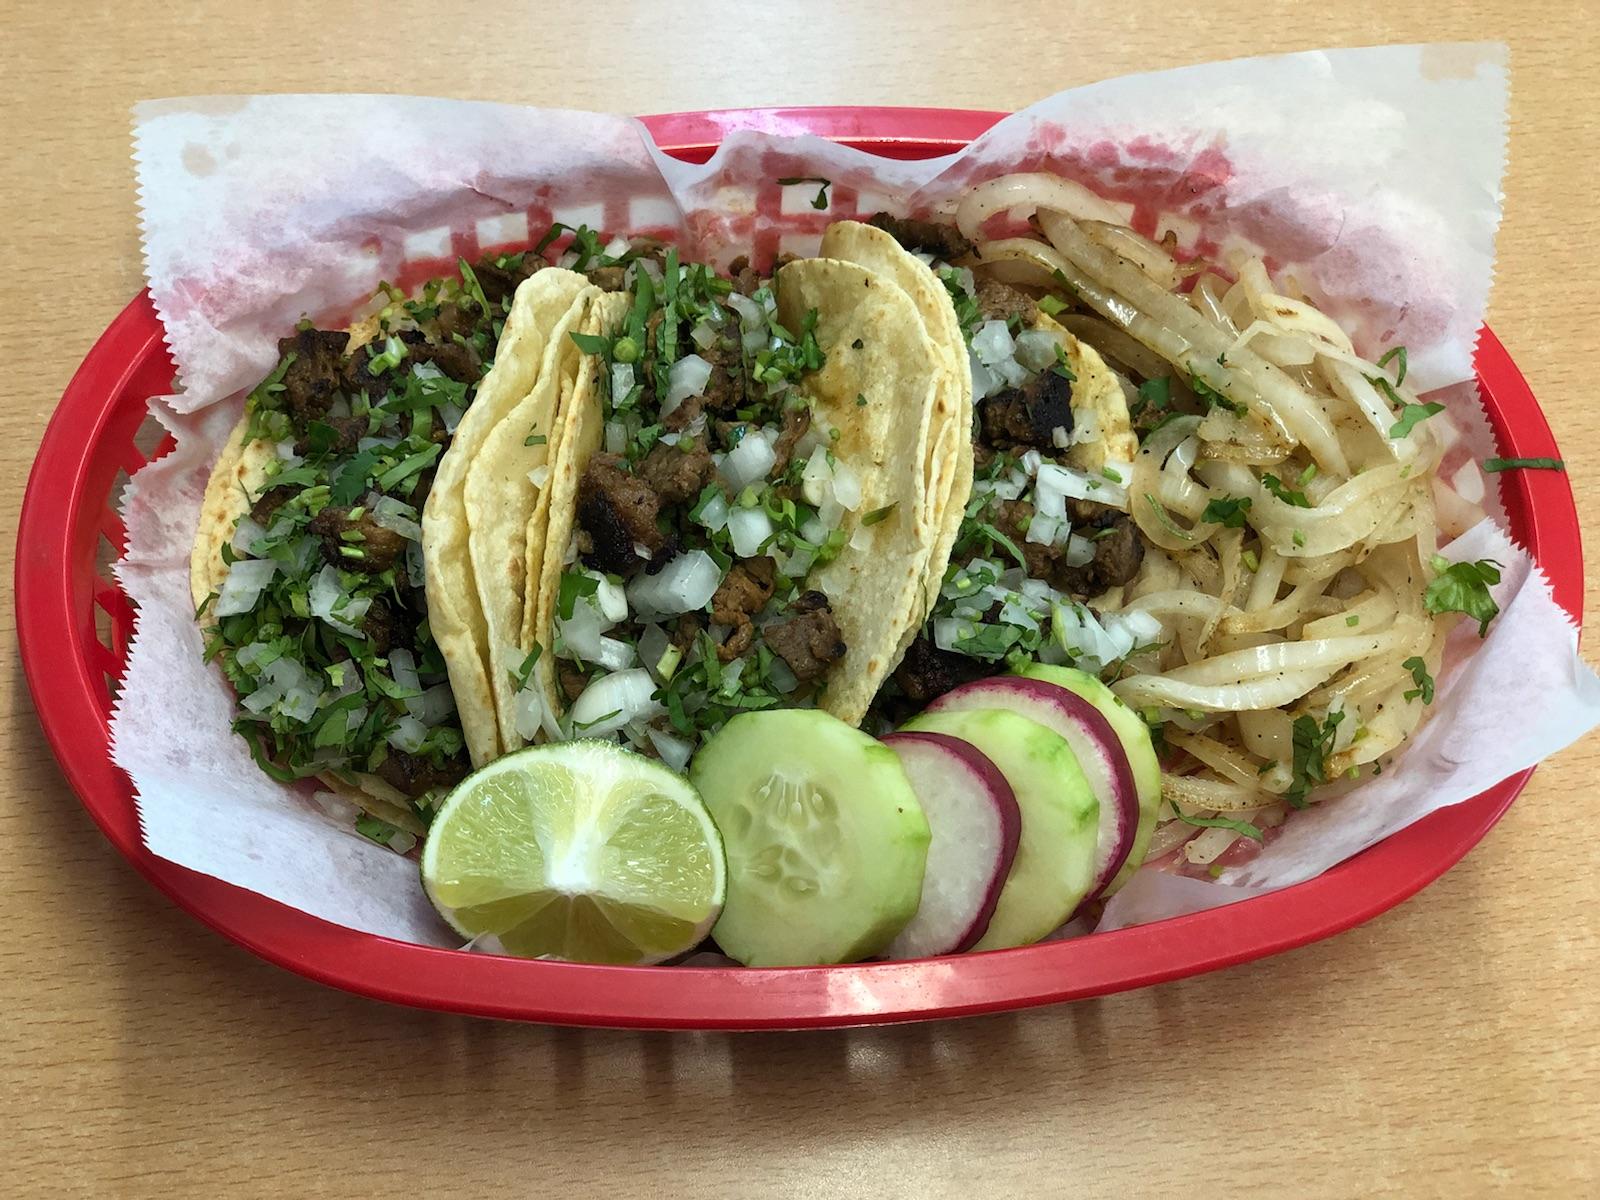 Shortages and border issues plaguing Mexican restaurants and stores in Alabama